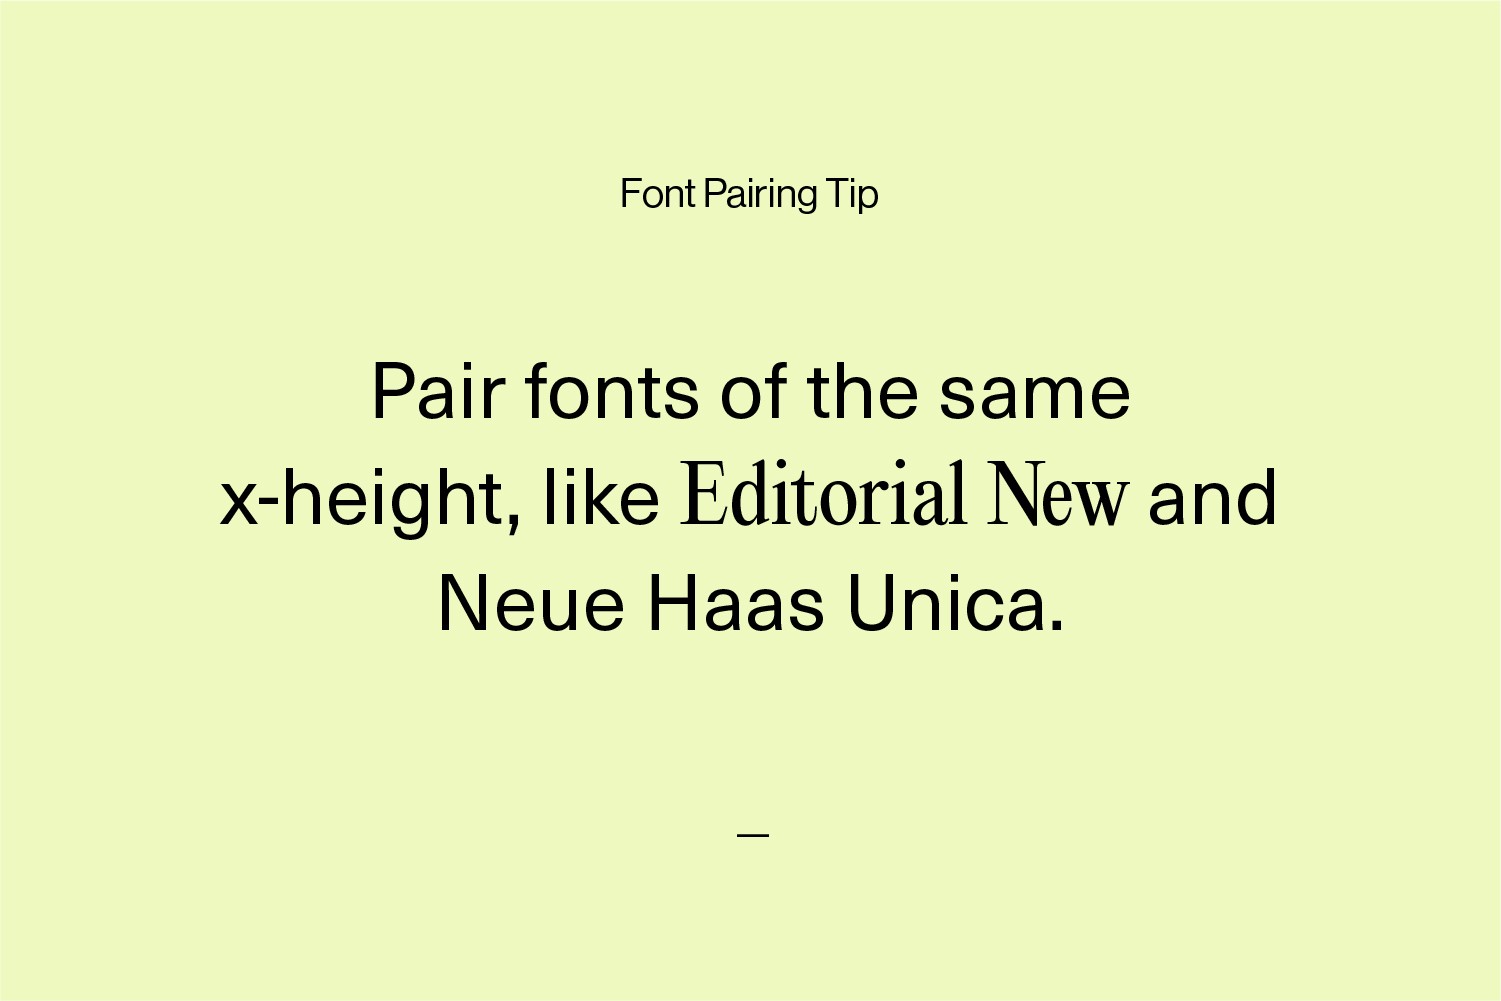 Font pairing advice that reads: Pair fonts of the same x-height, like Editorial New and Neue Haas Unica.